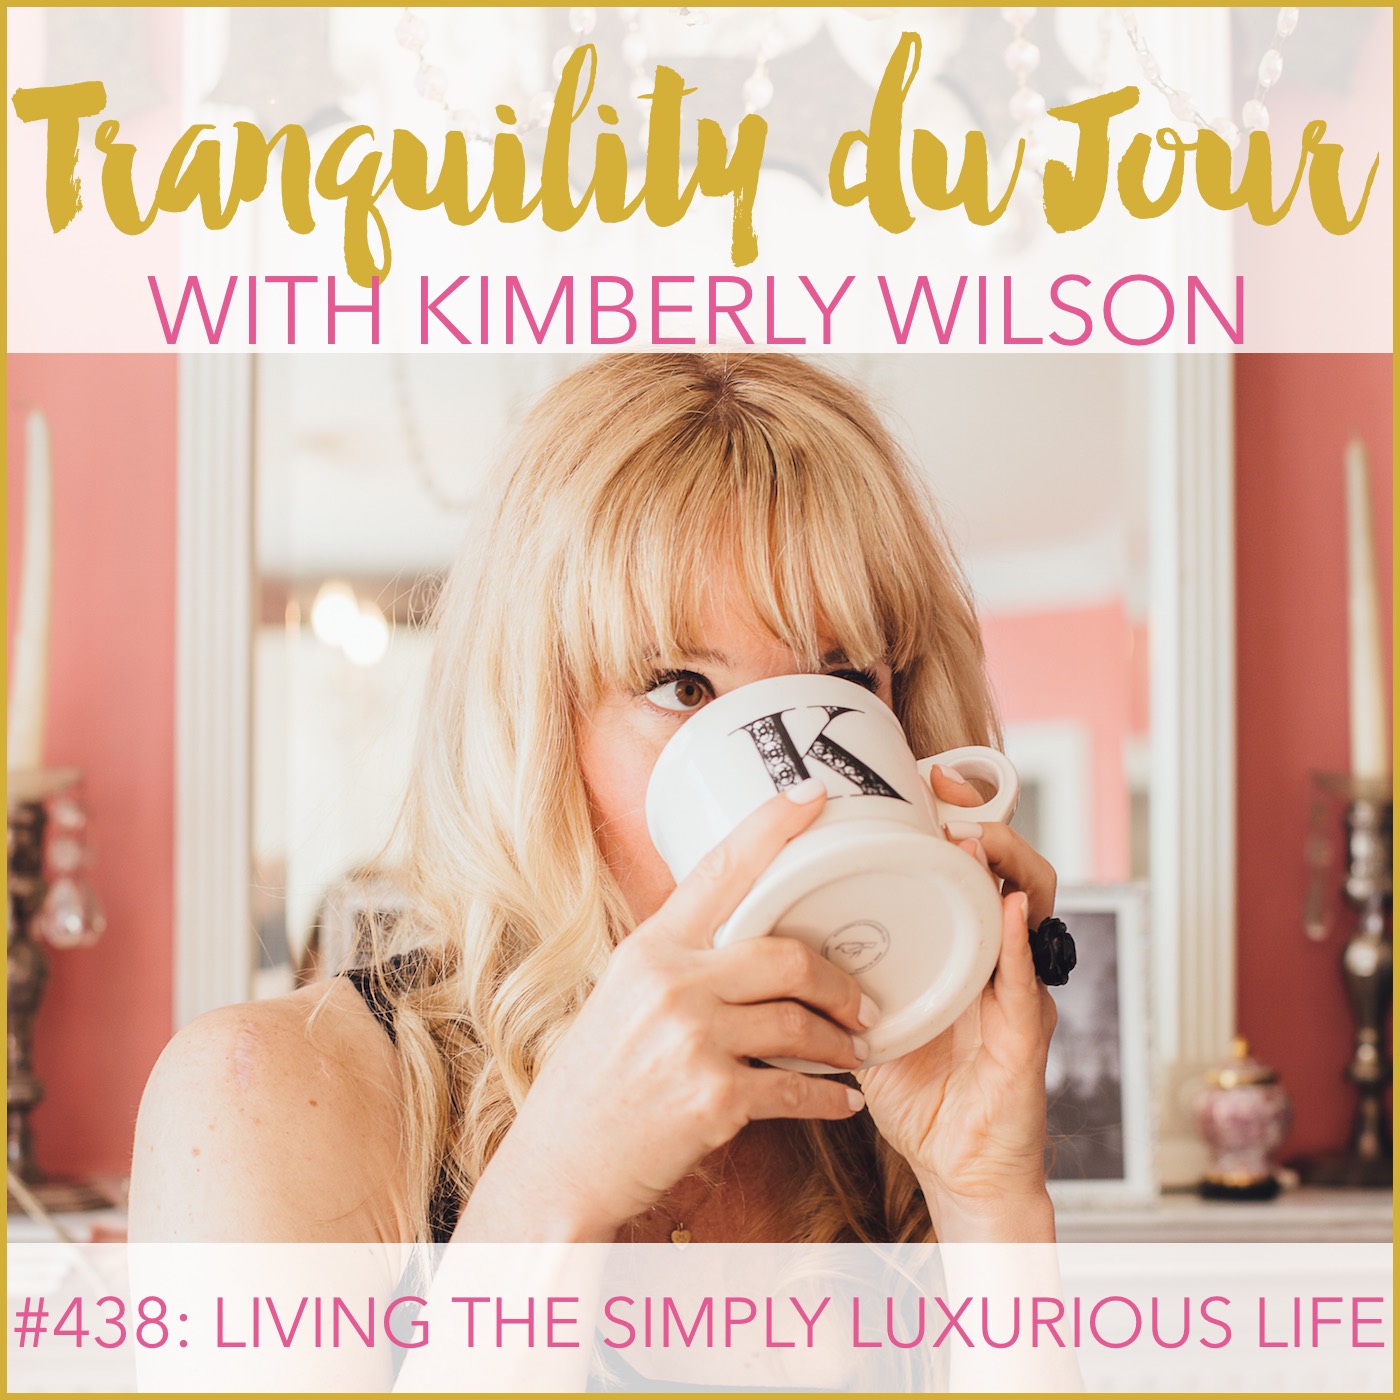 Tranquility Du Jour 438 Living The Simply Luxurious Life Kimberly Wilson